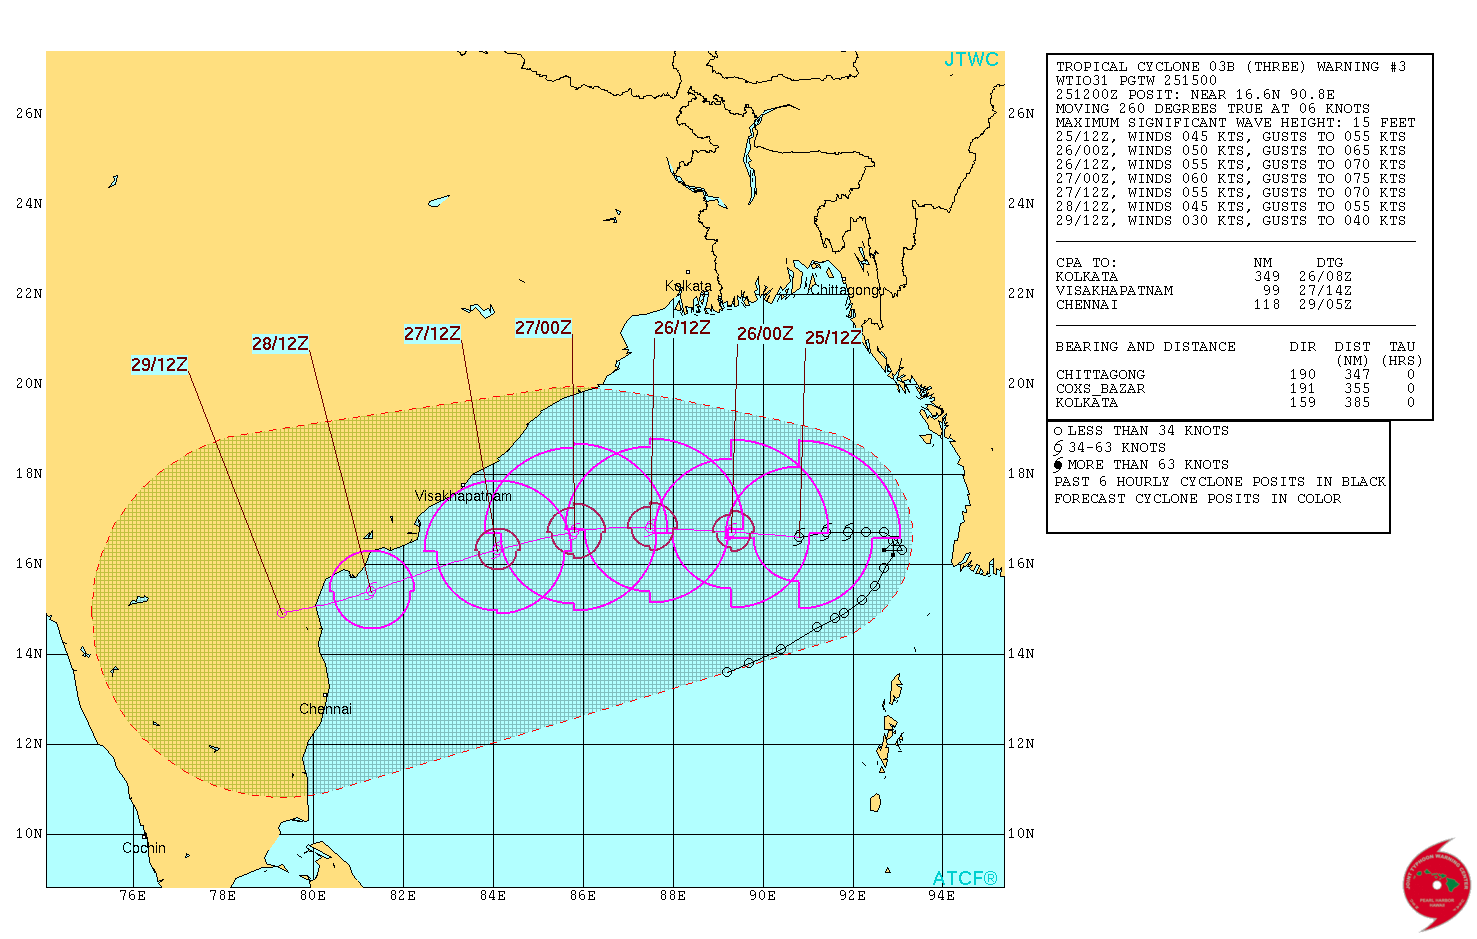 Cyclonic Storm Kyant 4-day forecast track. Image credit: JTWC